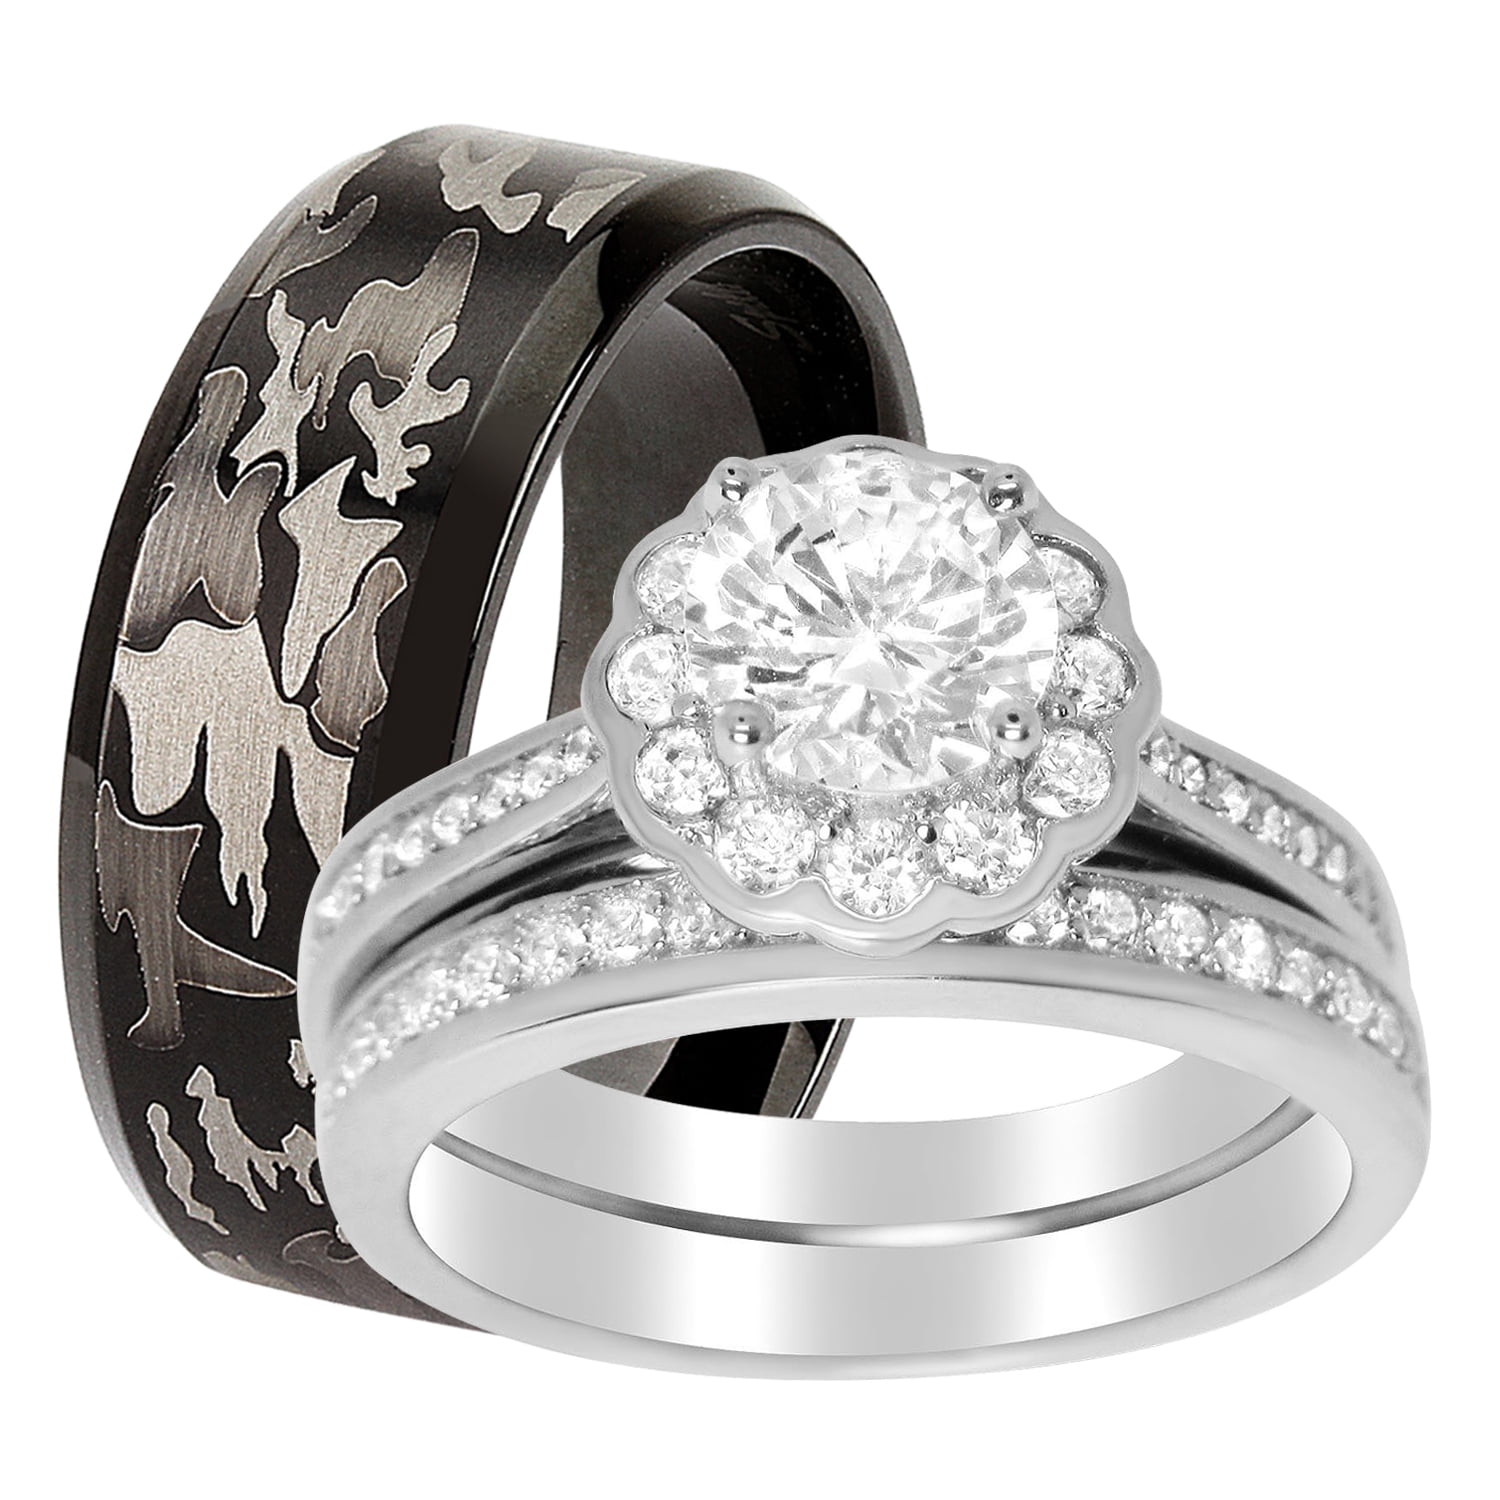 Kruiden Zeker Deuk Matching Wedding Rings for Him and Her Halo Bridal Set for Women Size 7 and  Black Wedding Band for Men Size 10 - Walmart.com